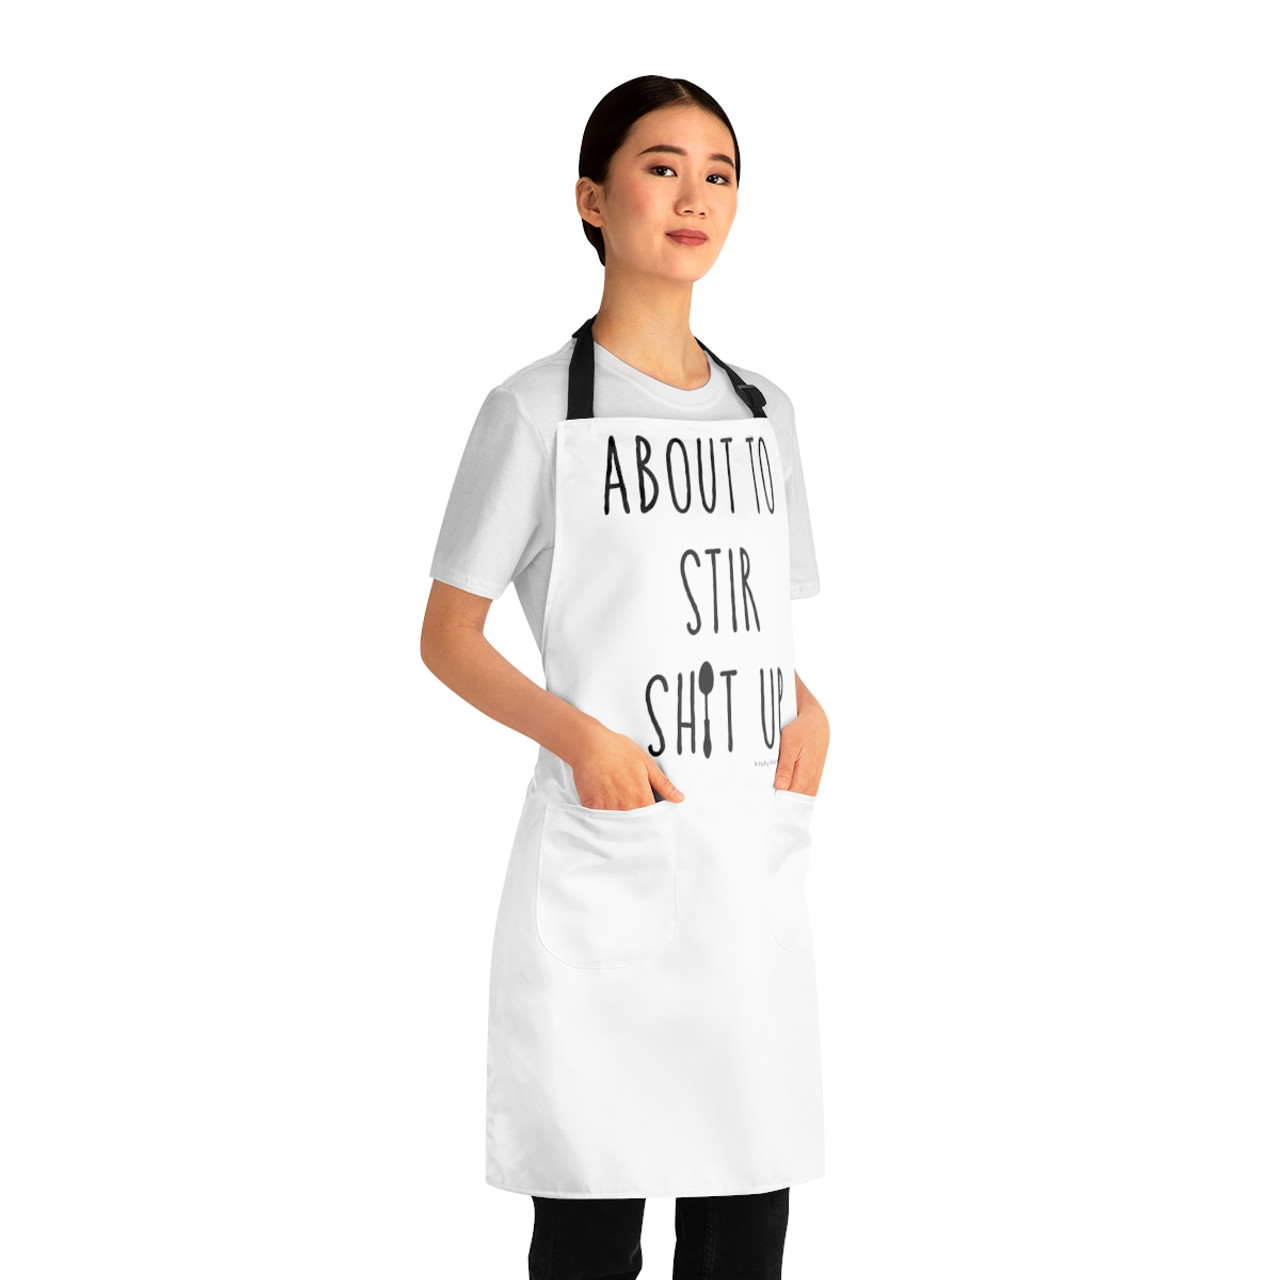 Funny Apron About To Stir Shit Up Aprons Chef Gifts Grilling Apron